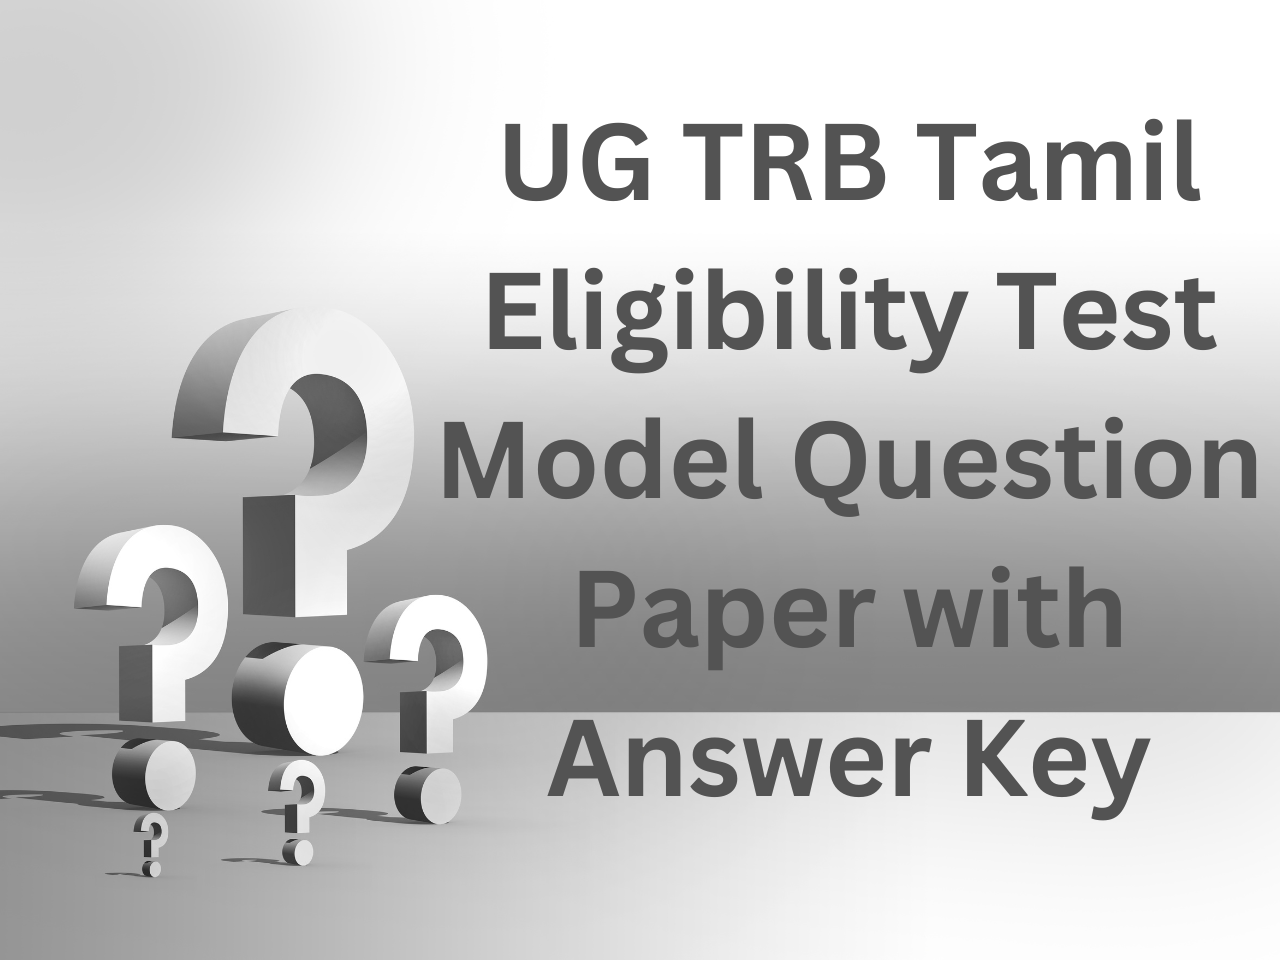 UG TRB Tamil Eligibility Test Model Question Paper with Answer Key